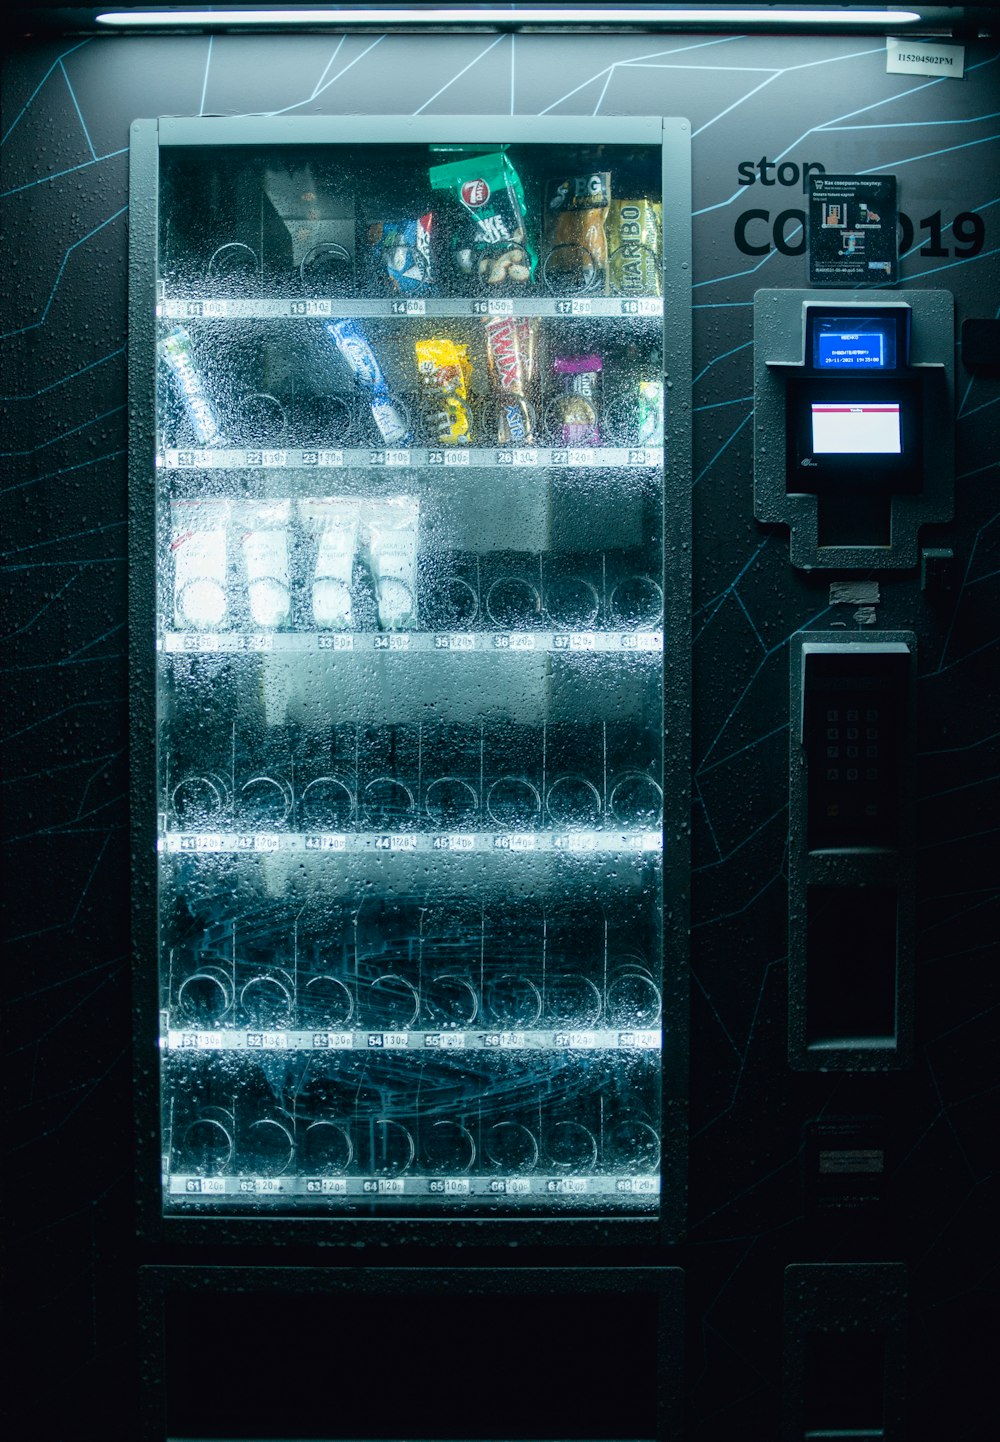 a vending machine with drinks and snacks in it